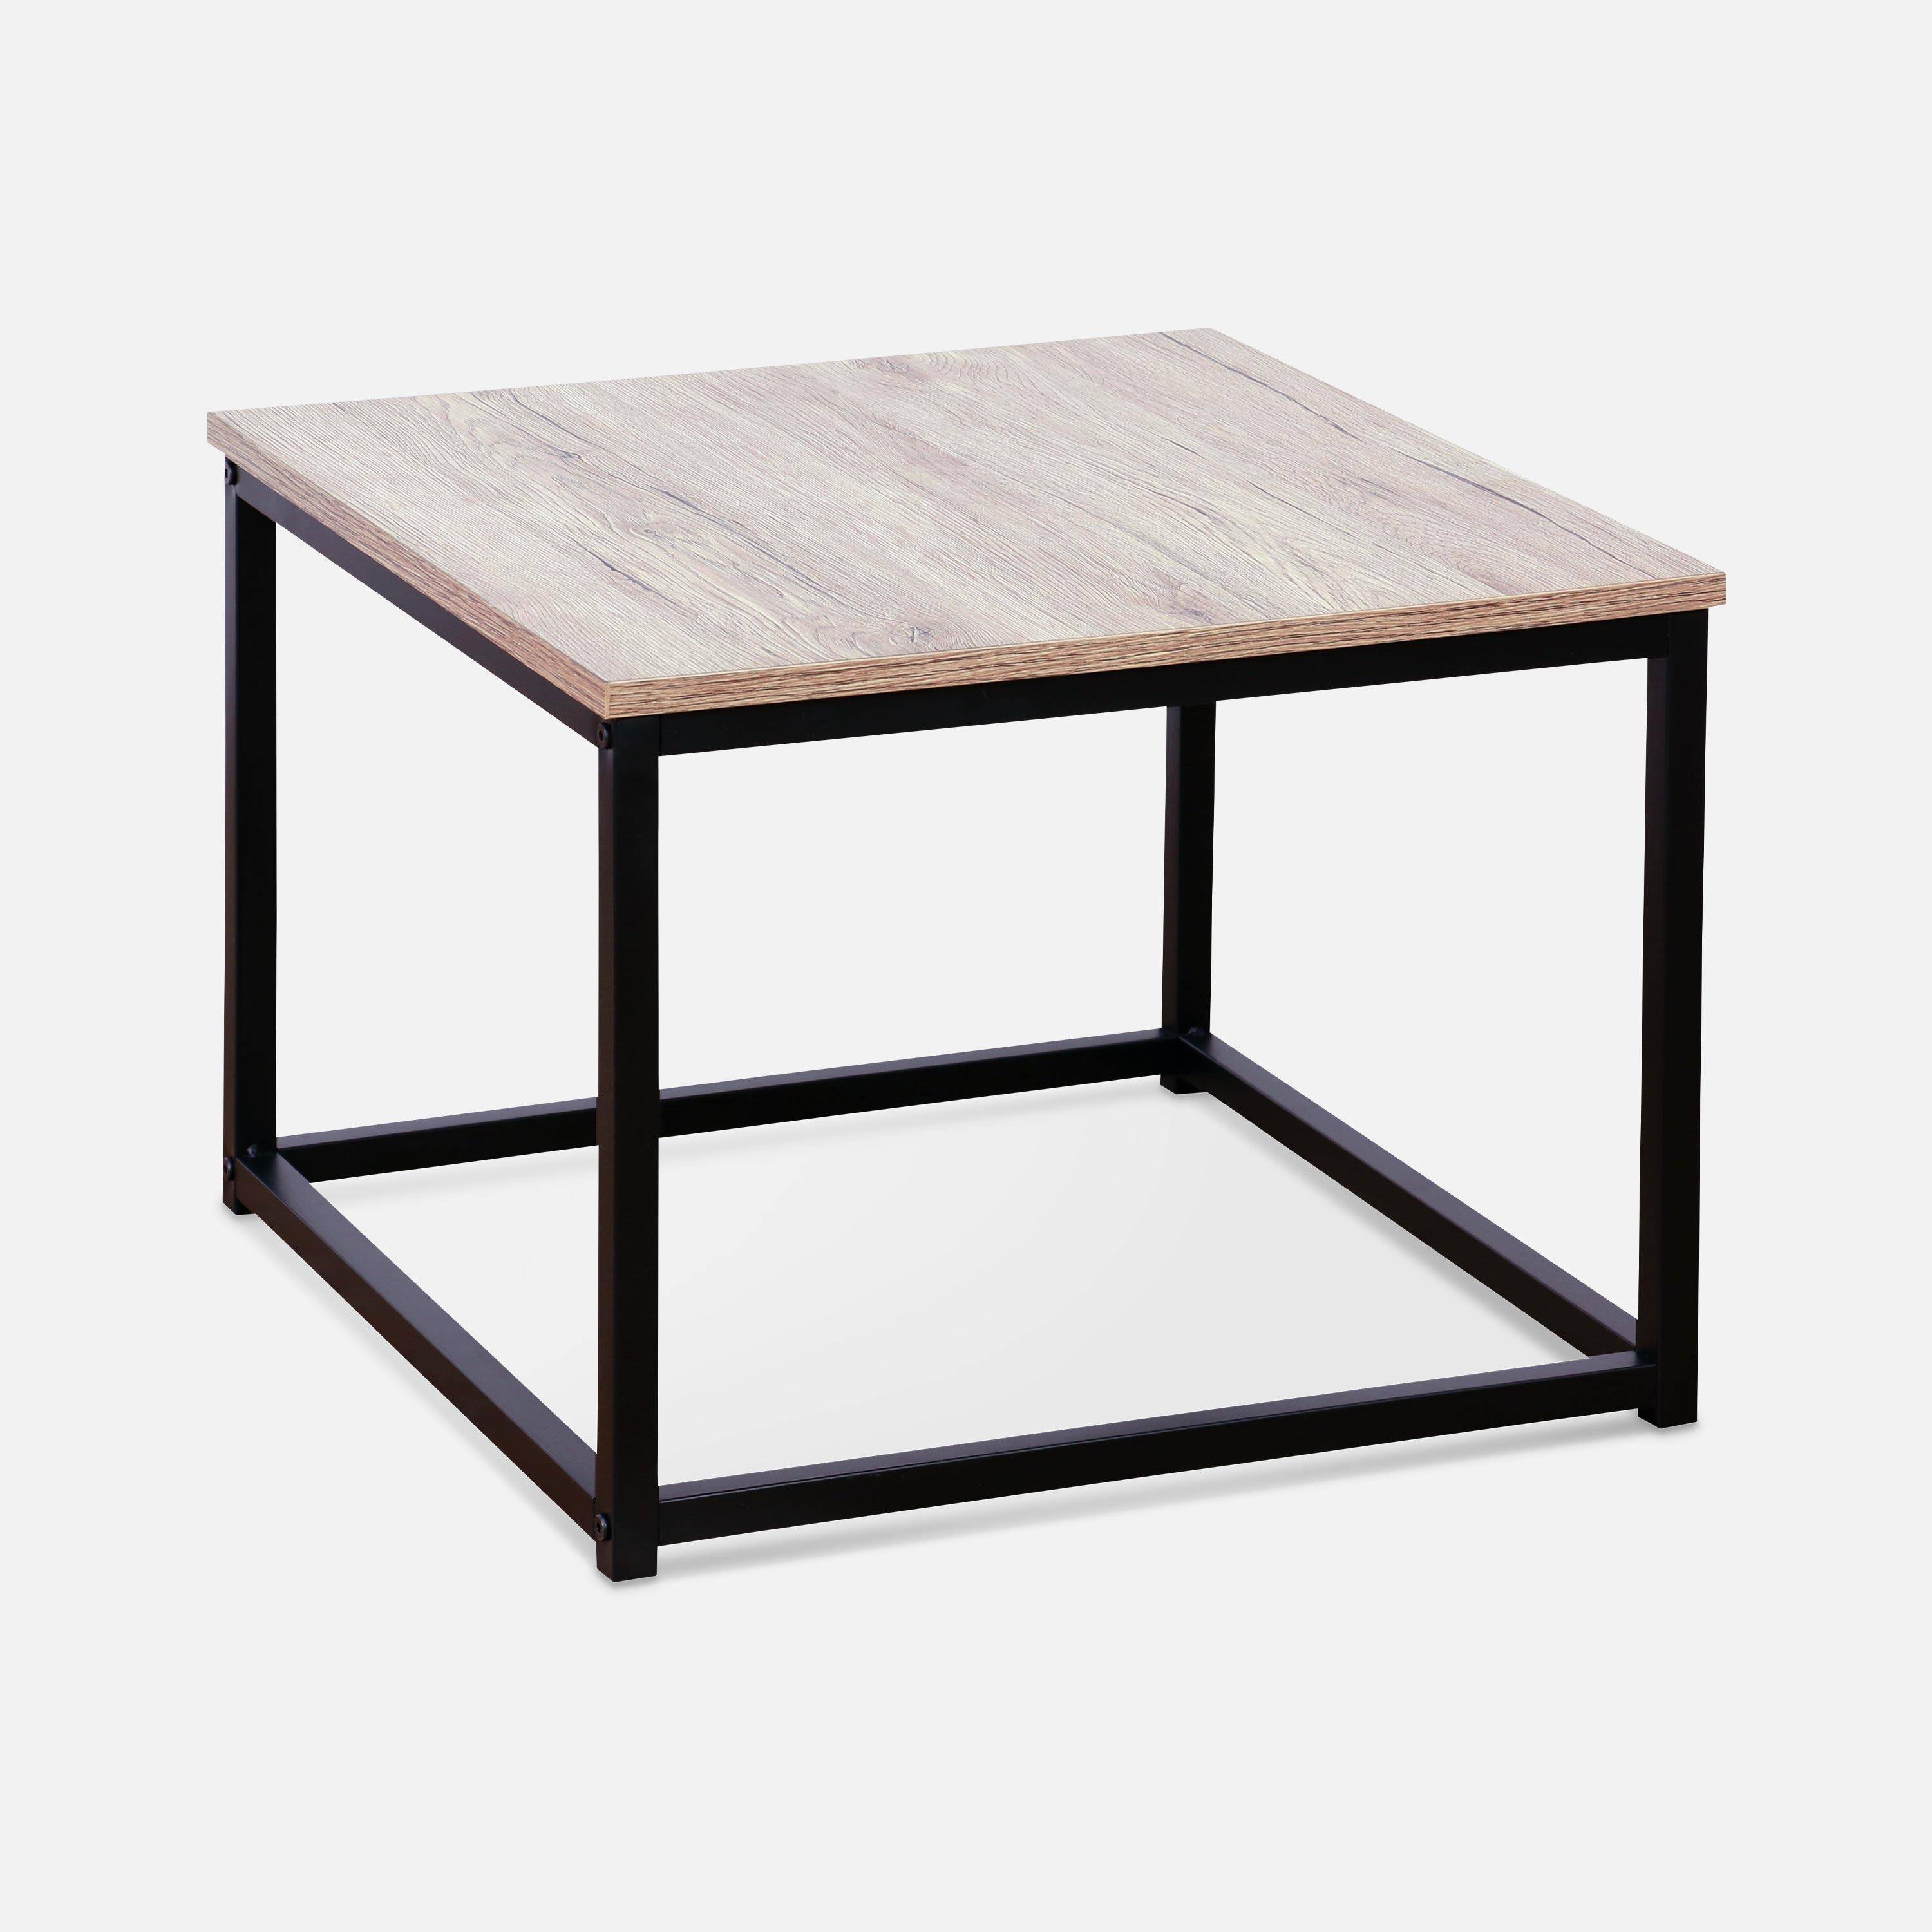 Set of 3 metal and wood-effect nesting tables, large table 100x60x45cm, 2x small tables 50x50x38cm - Loft - Black,sweeek,Photo7